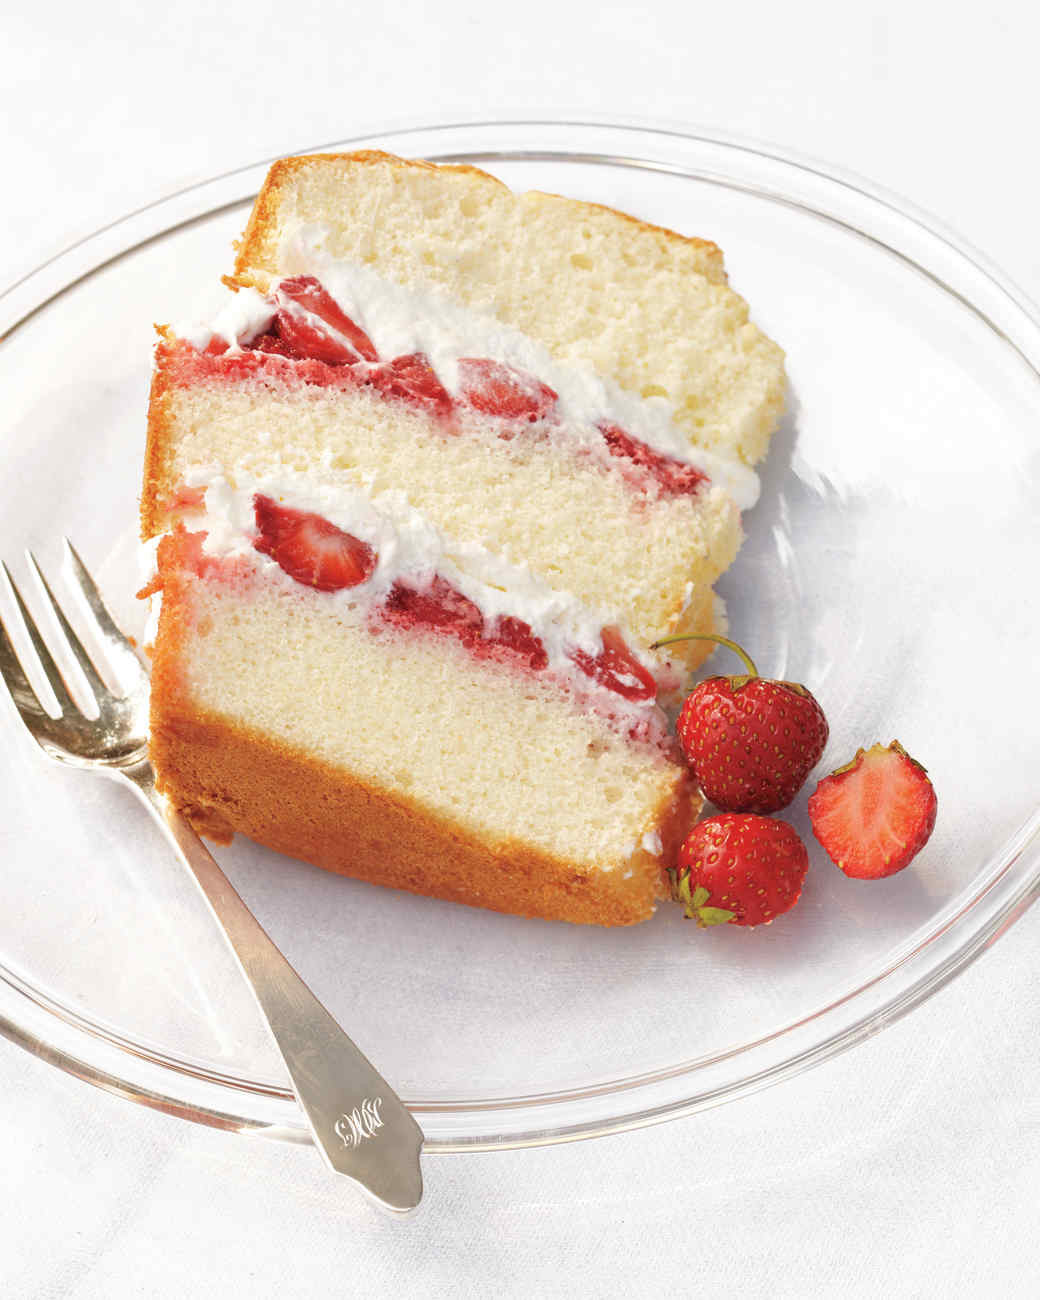 Strawberry Cake Martha Stewart
 Our Most Spectacular Strawberry Recipes